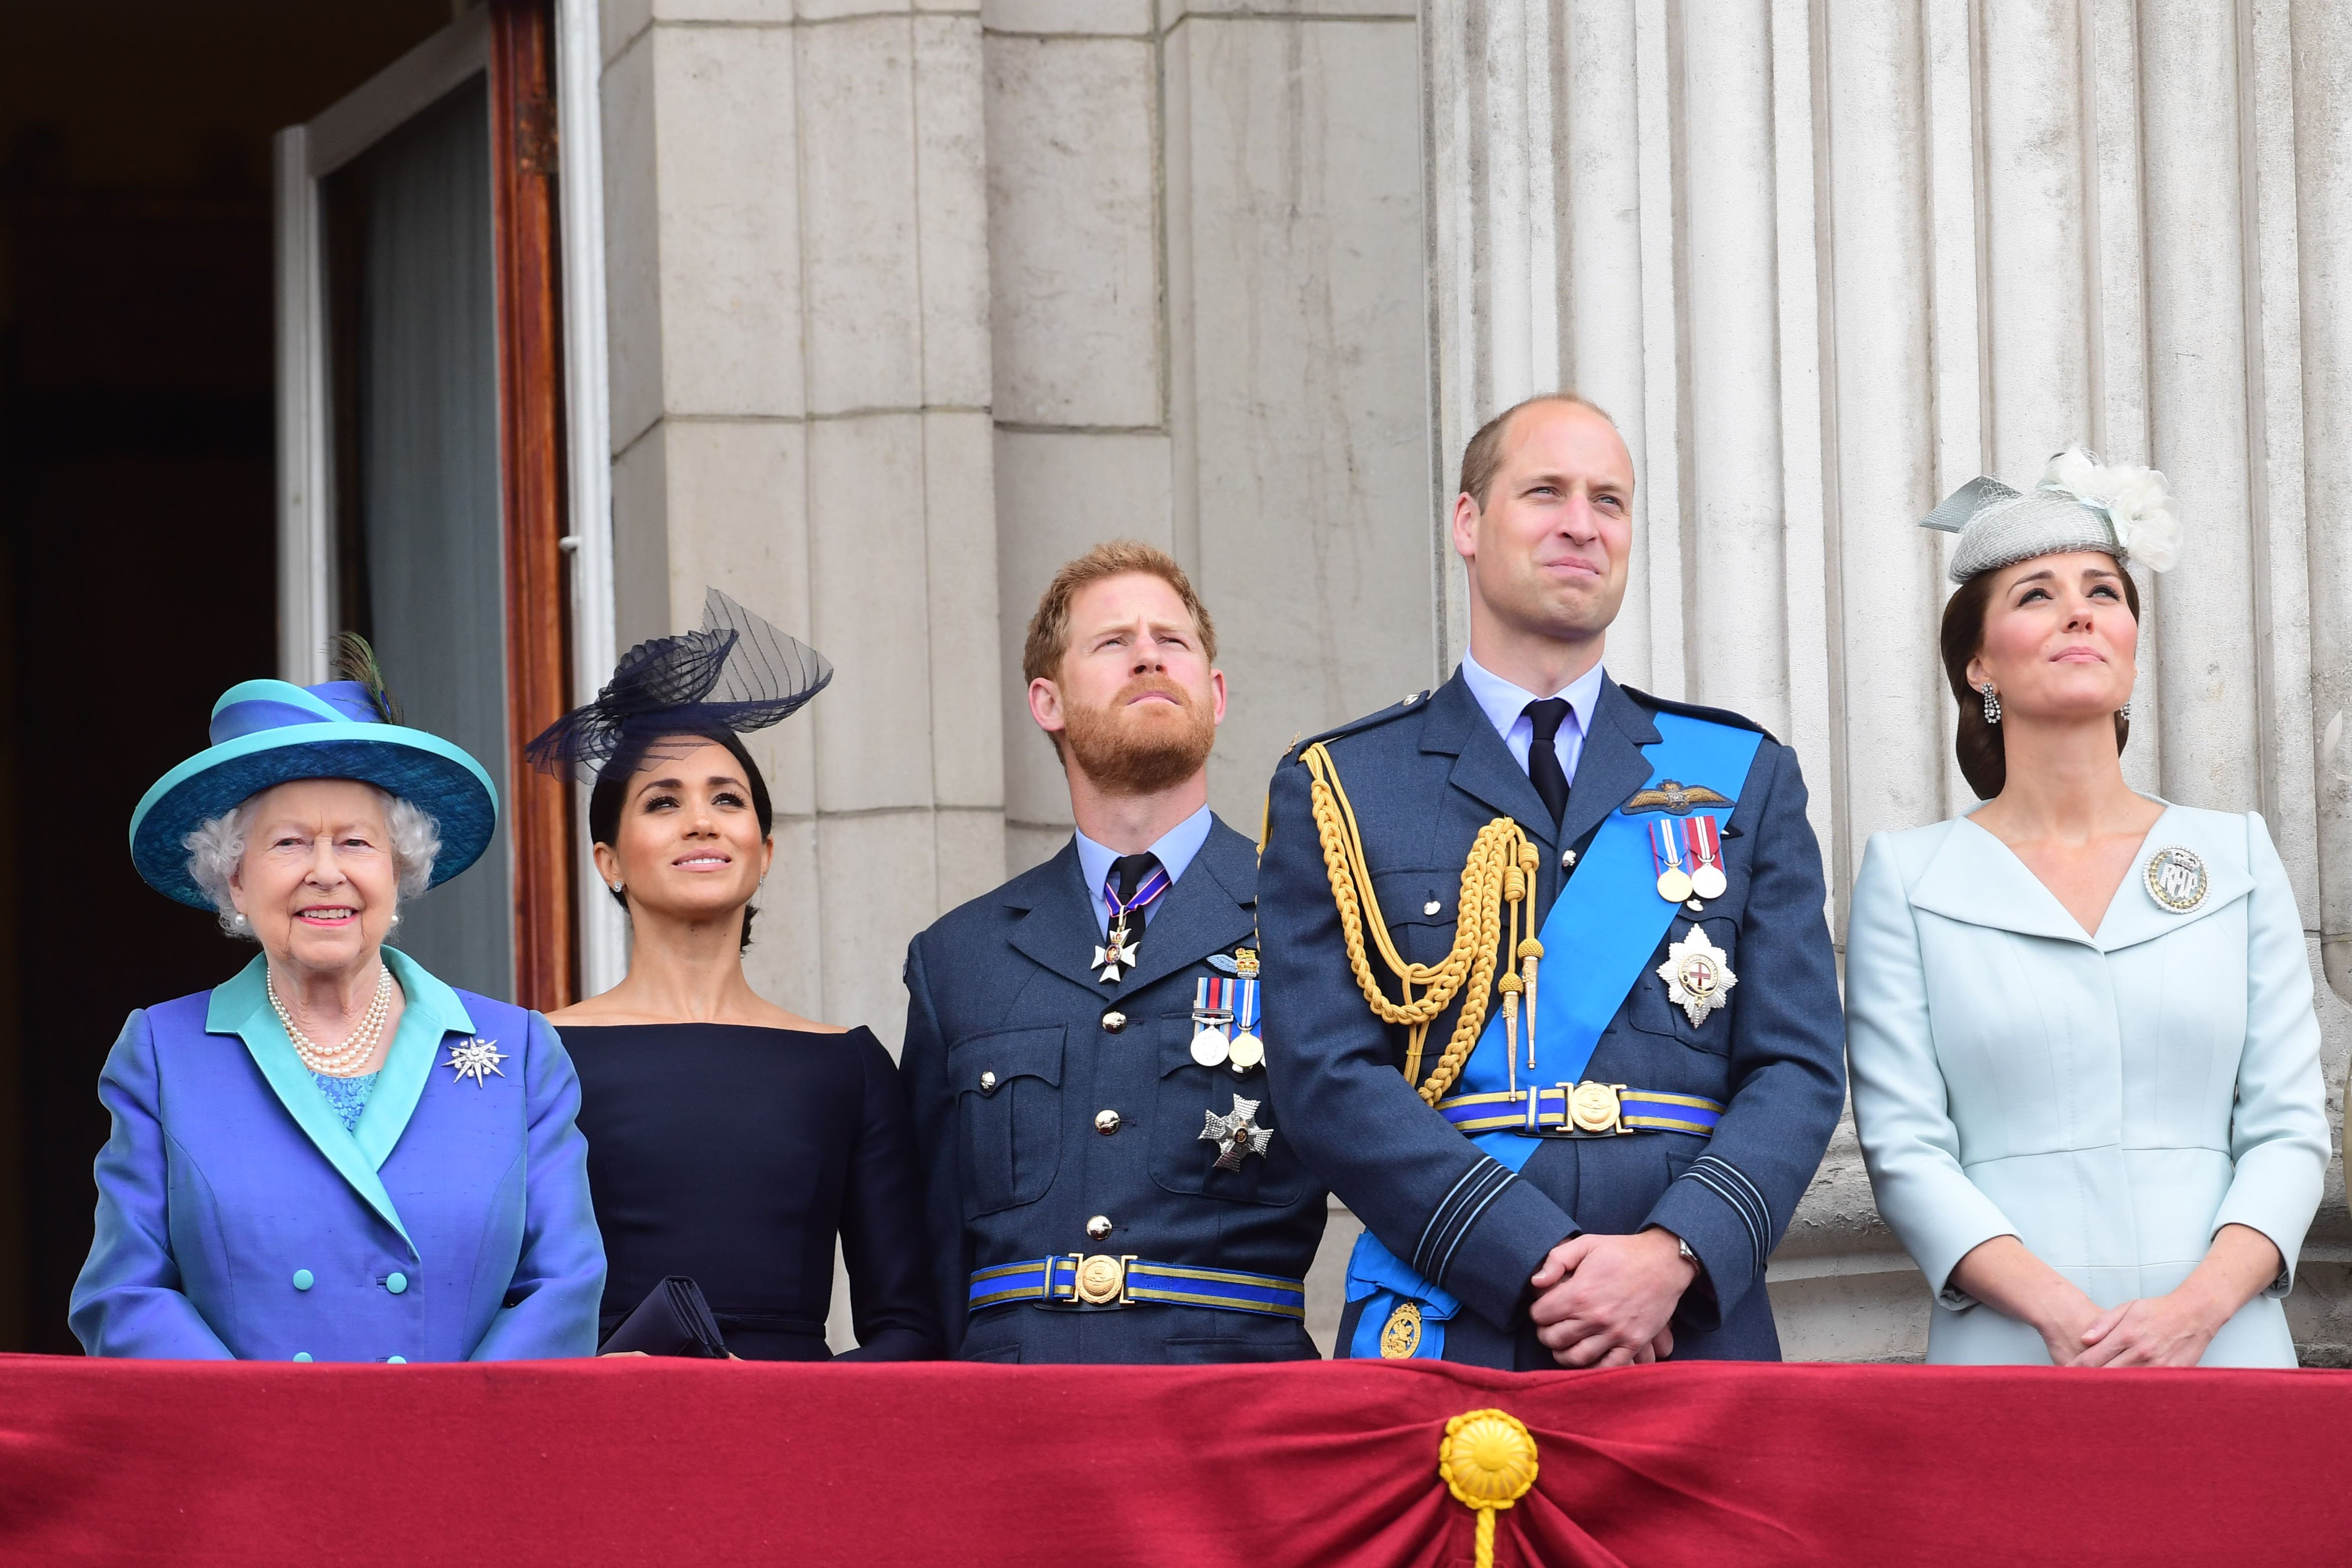 Queen Elizabeth II, Meghan, Duchess of Sussex, Prince Harry, Duke of Sussex, Prince William Duke of Cambridge and Catherine, Duchess of Cambridge captured watching the RAF 100th anniversary flypast from the balcony of Buckingham Palace on July 10, 2018 in London, England. / Source: Getty Images